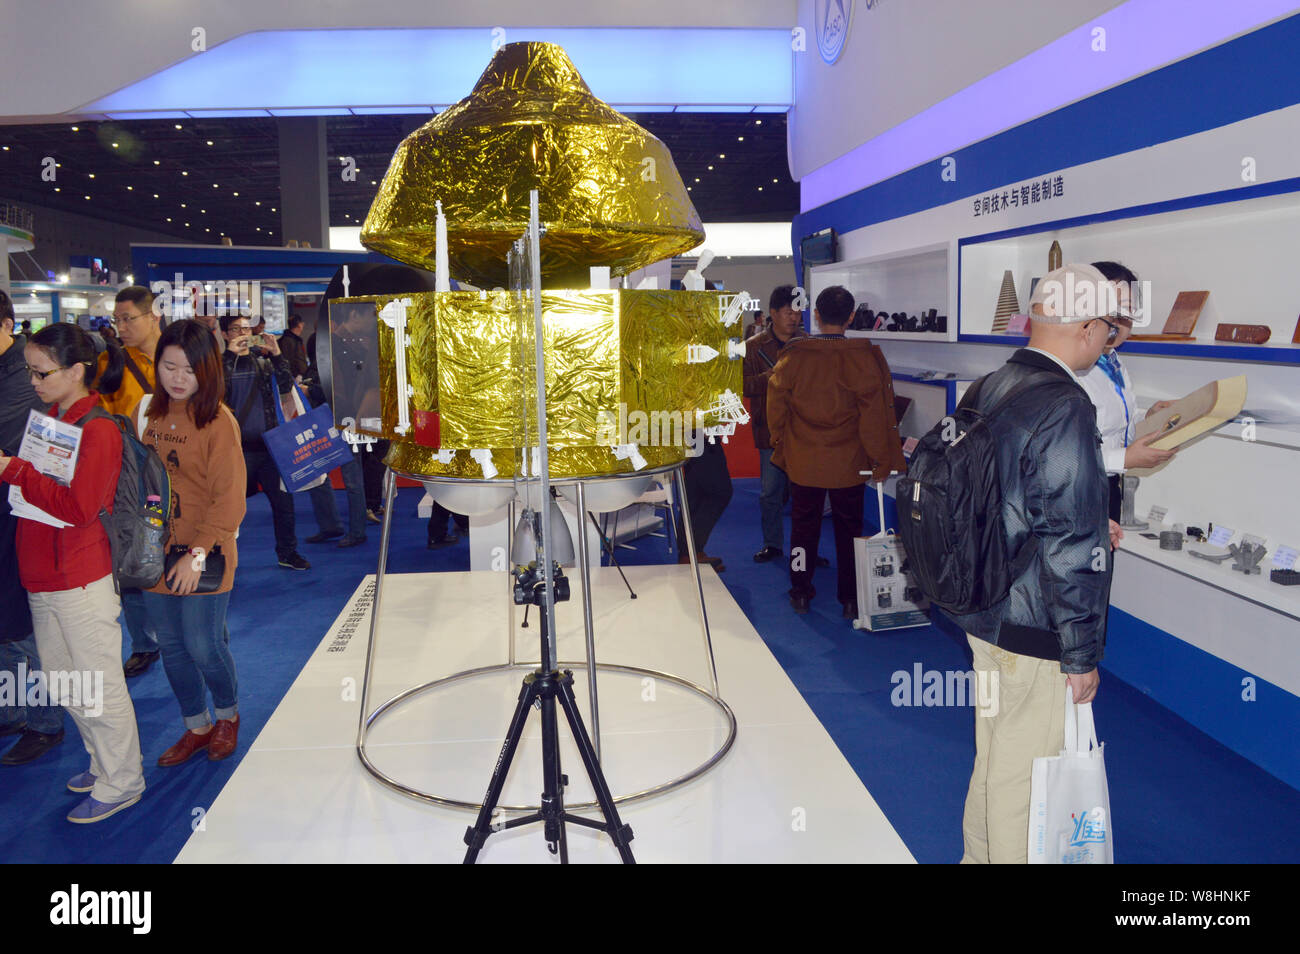 A prototype model of China's Mars probe is on display at the stand of China Aerospace Science and Technology Corporation during the 17th China Interna Stock Photo